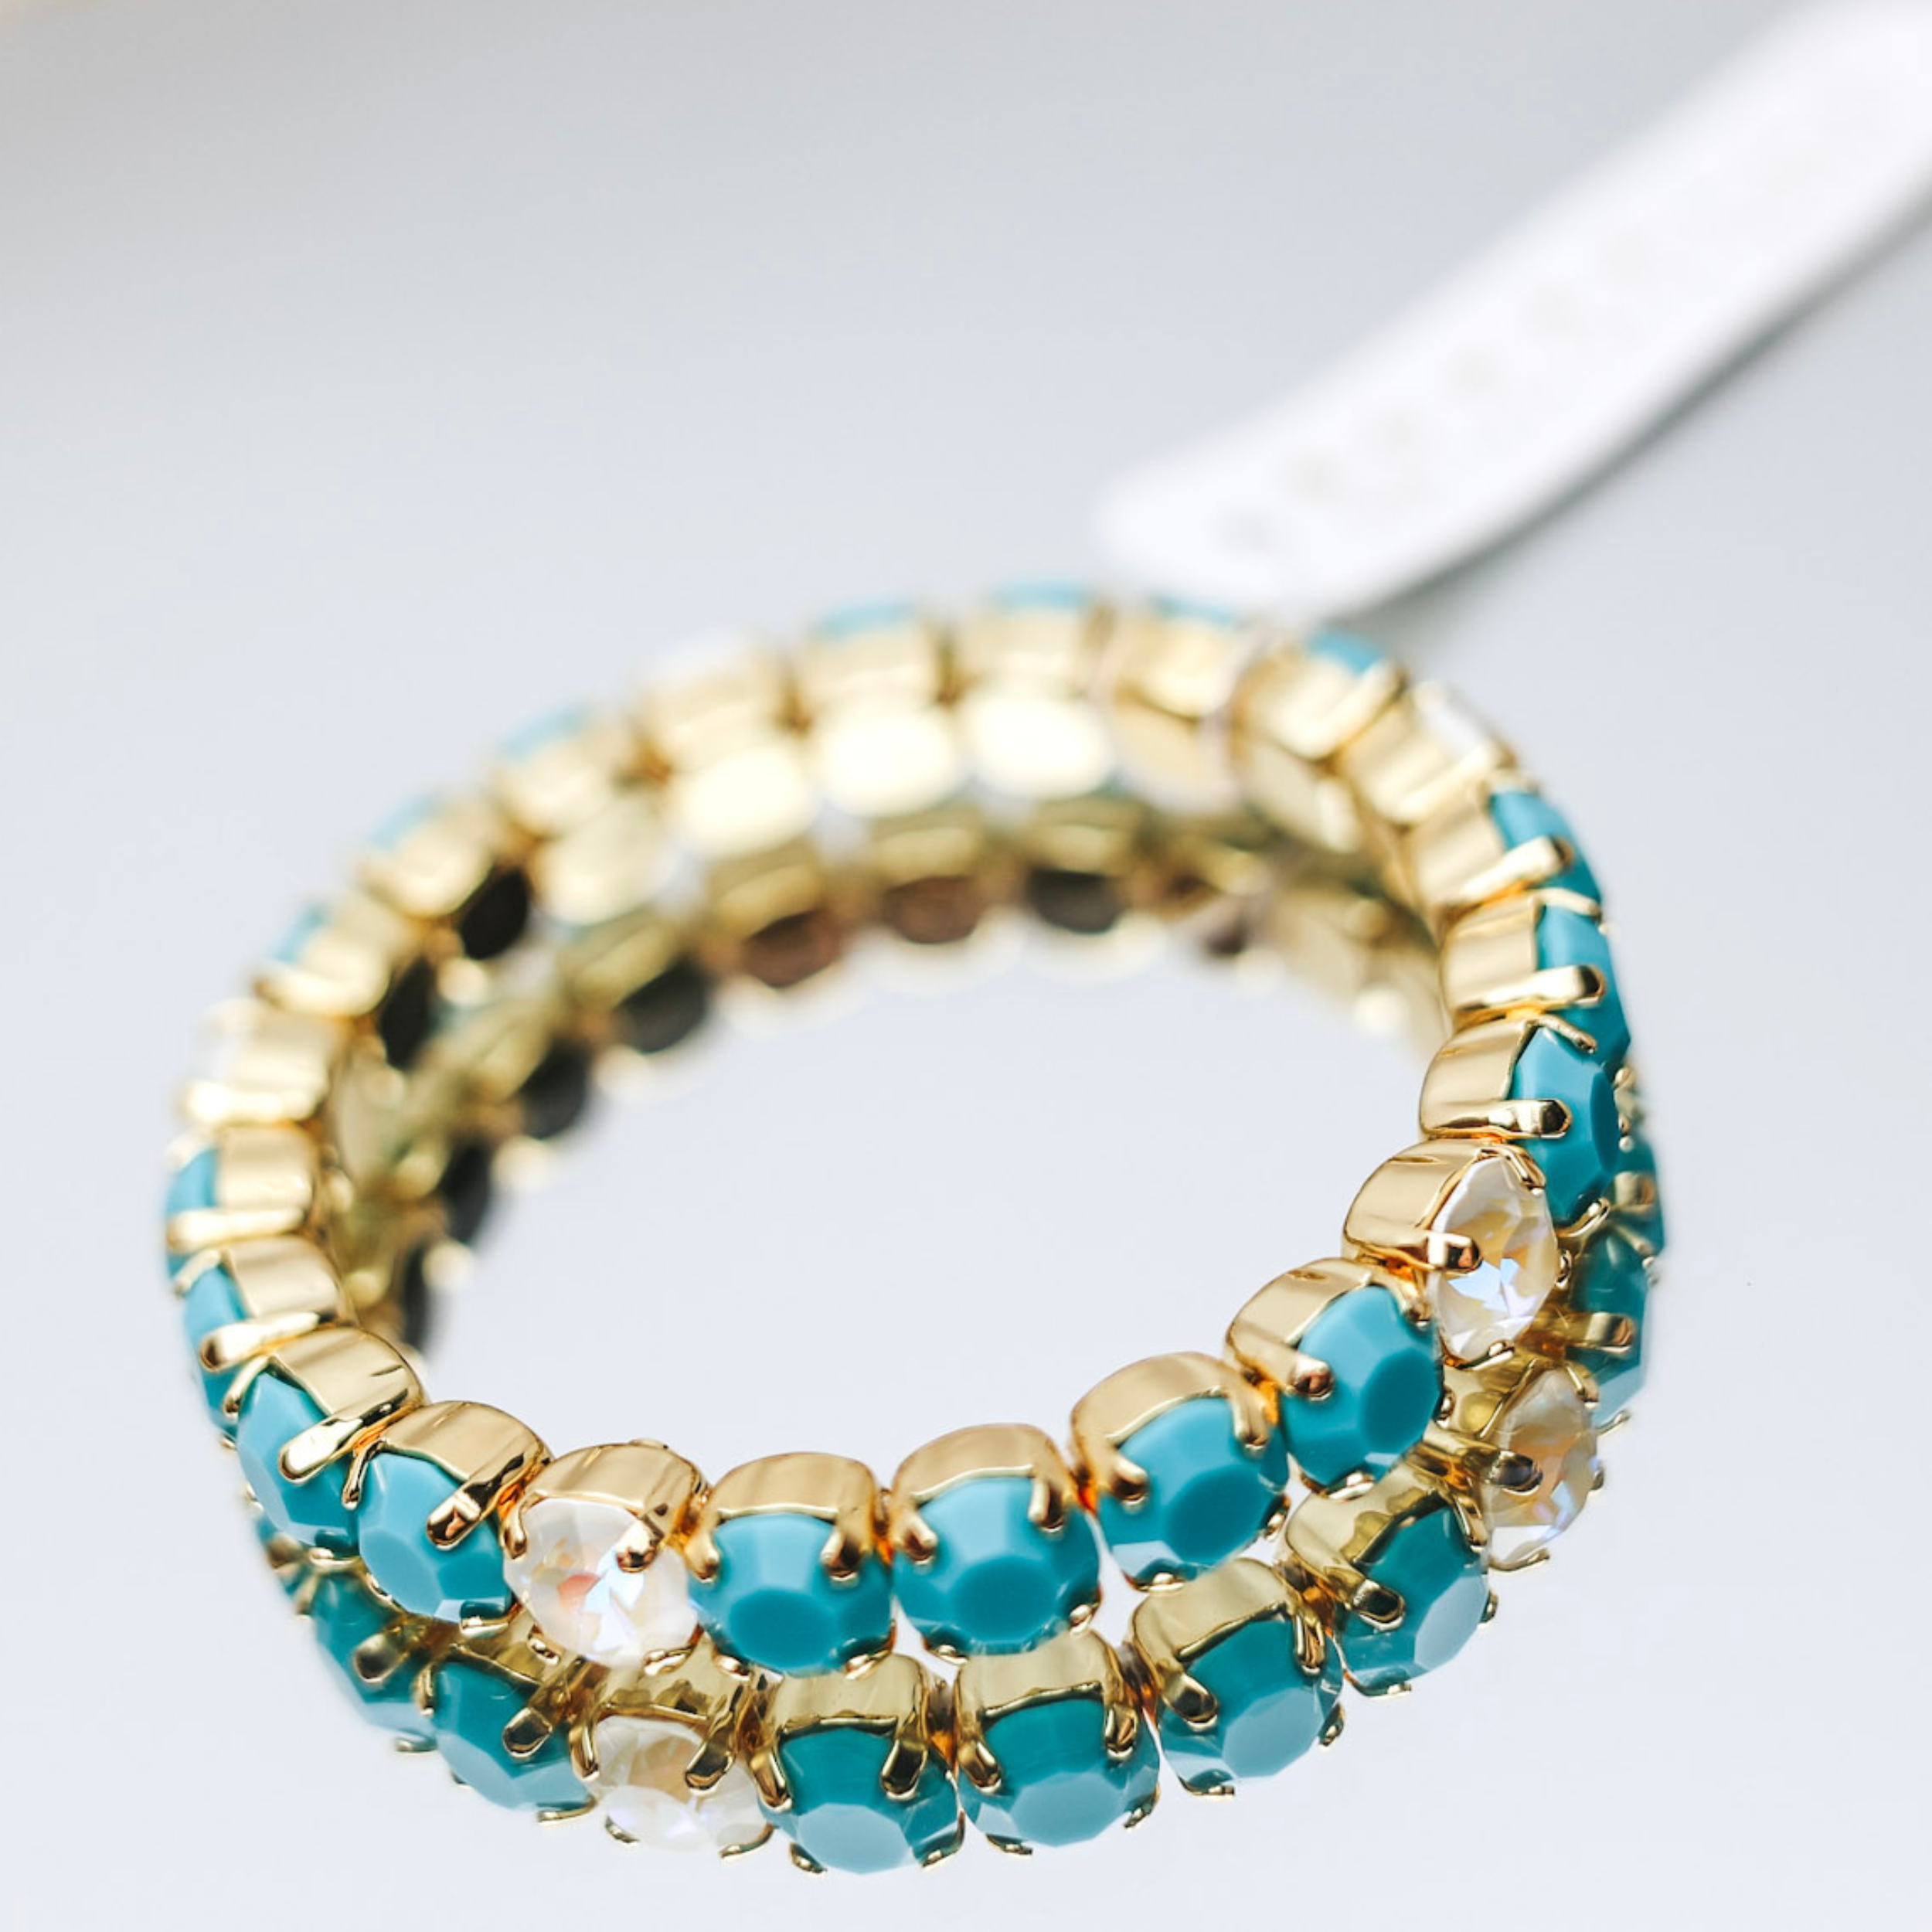 A gold-tone bracelet with crystals in turquoise blue and ivory, pictured on a mirror.